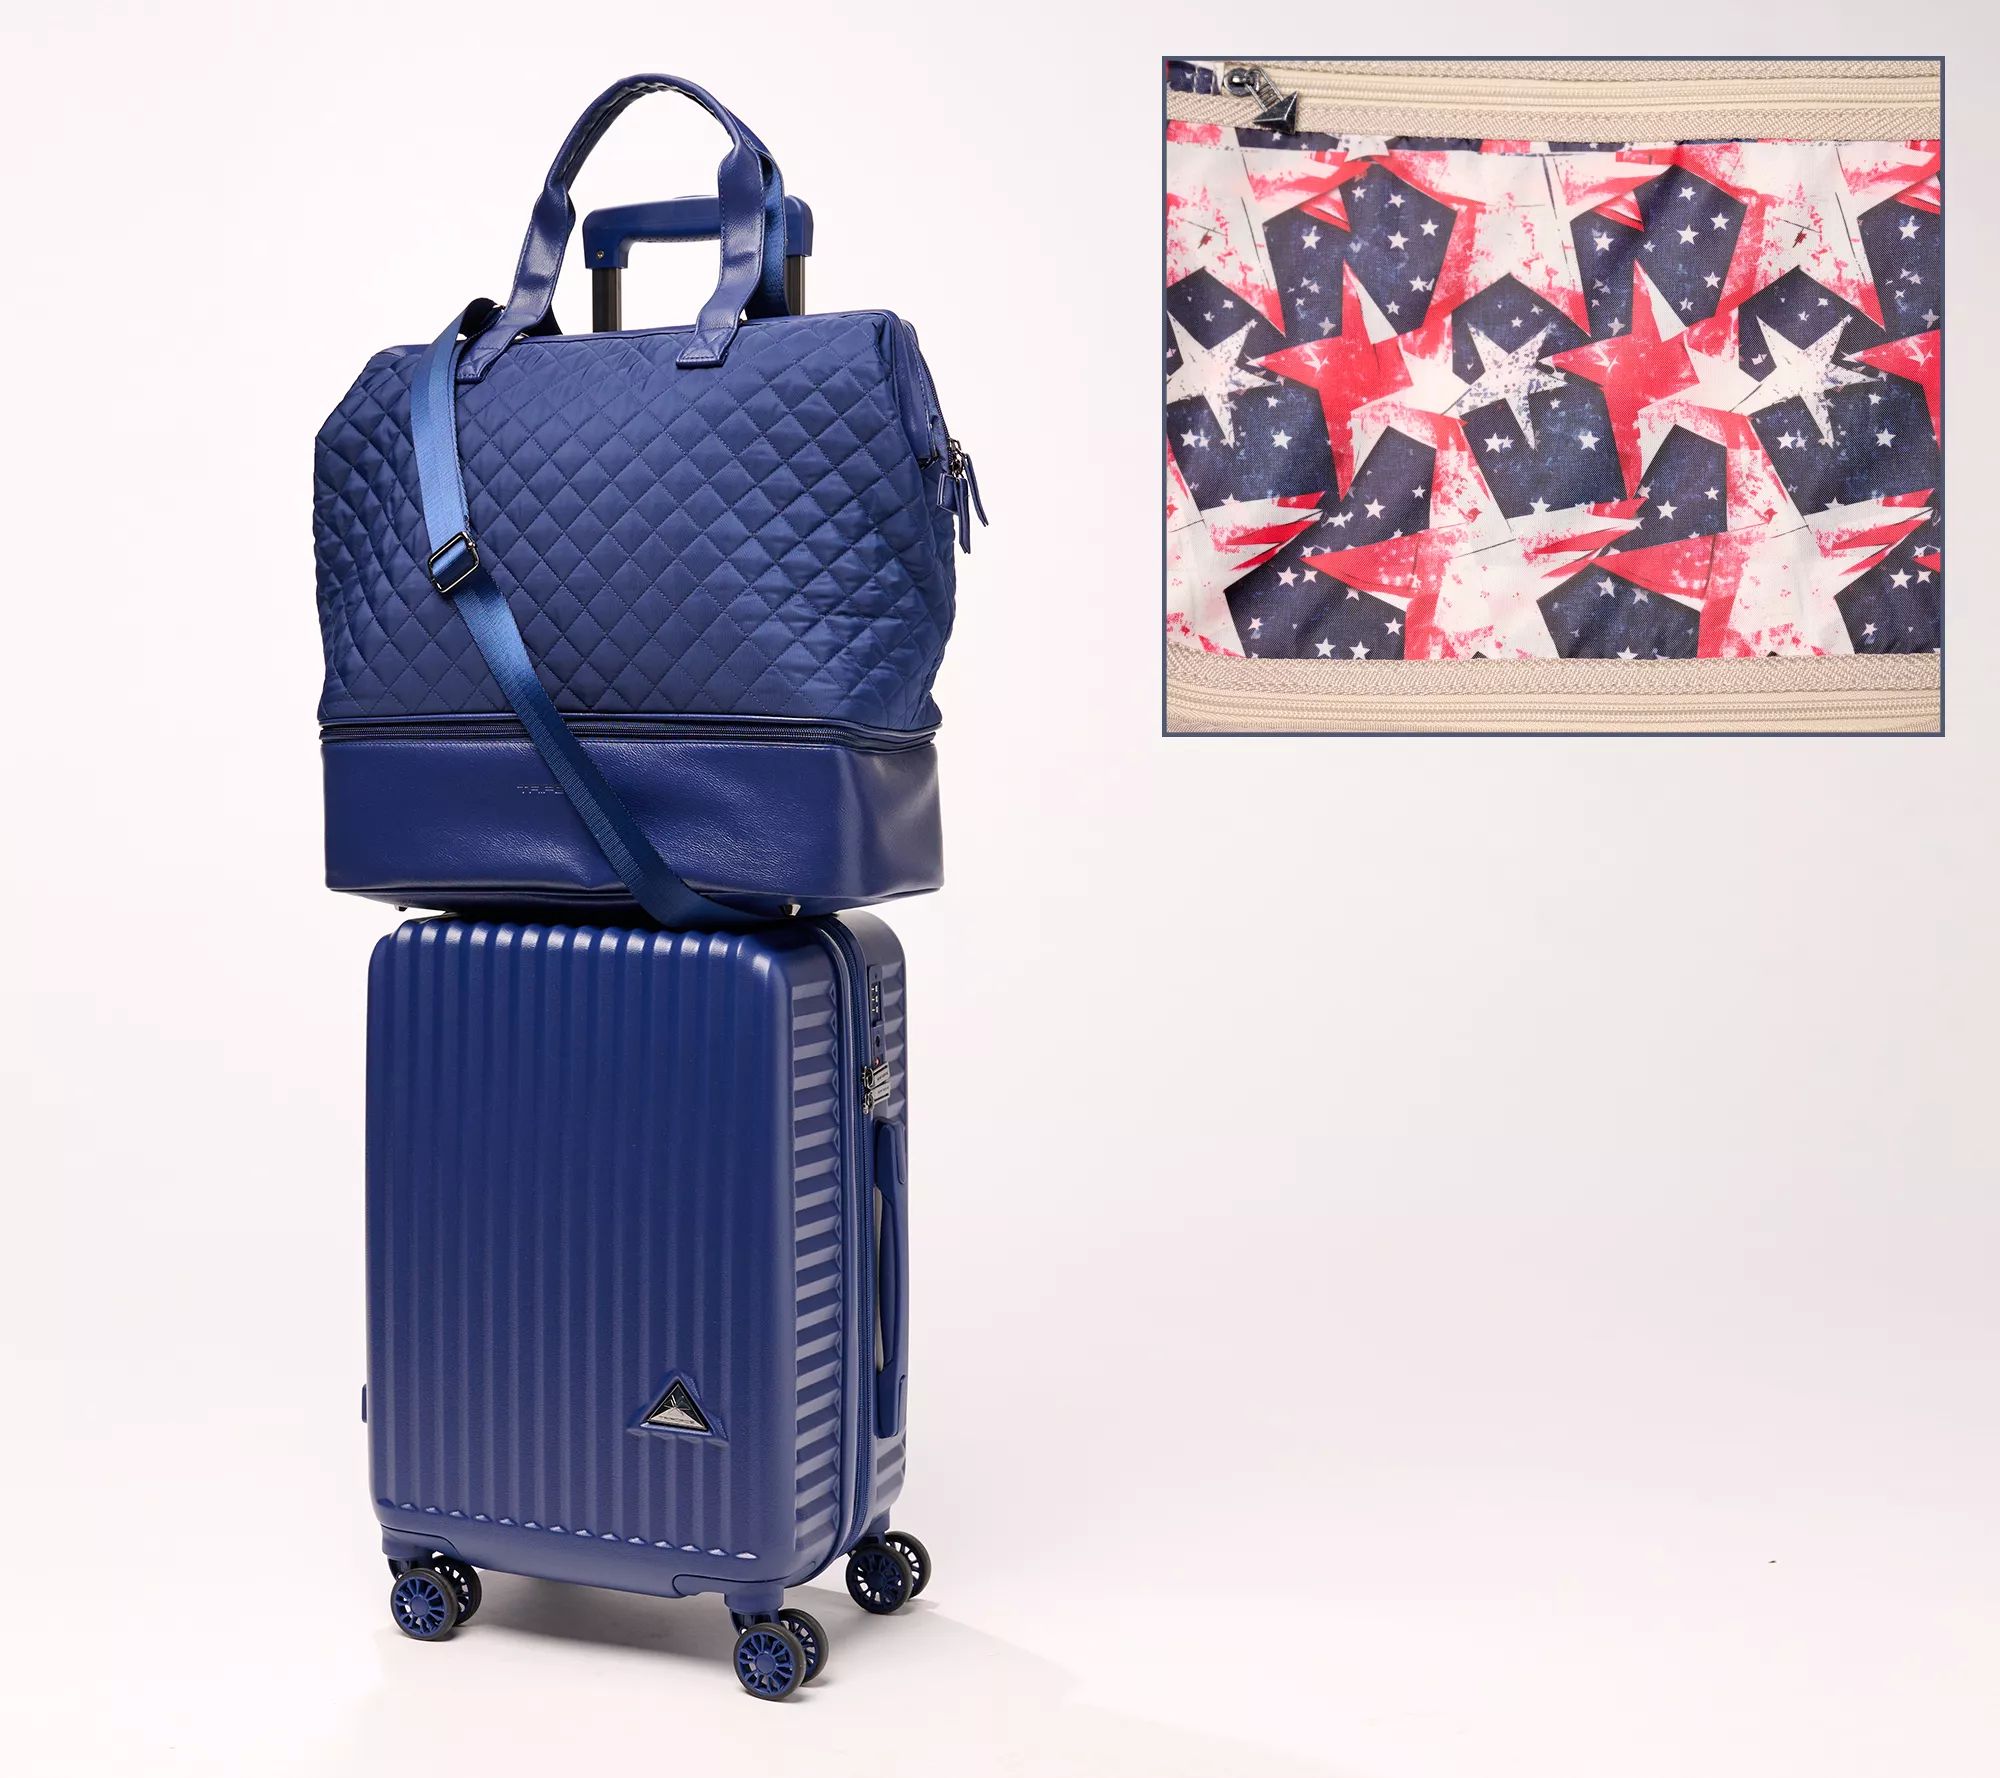 Triforce 21" Hardside Carry-On Luggage with Weekender Bag - QVC.com | QVC